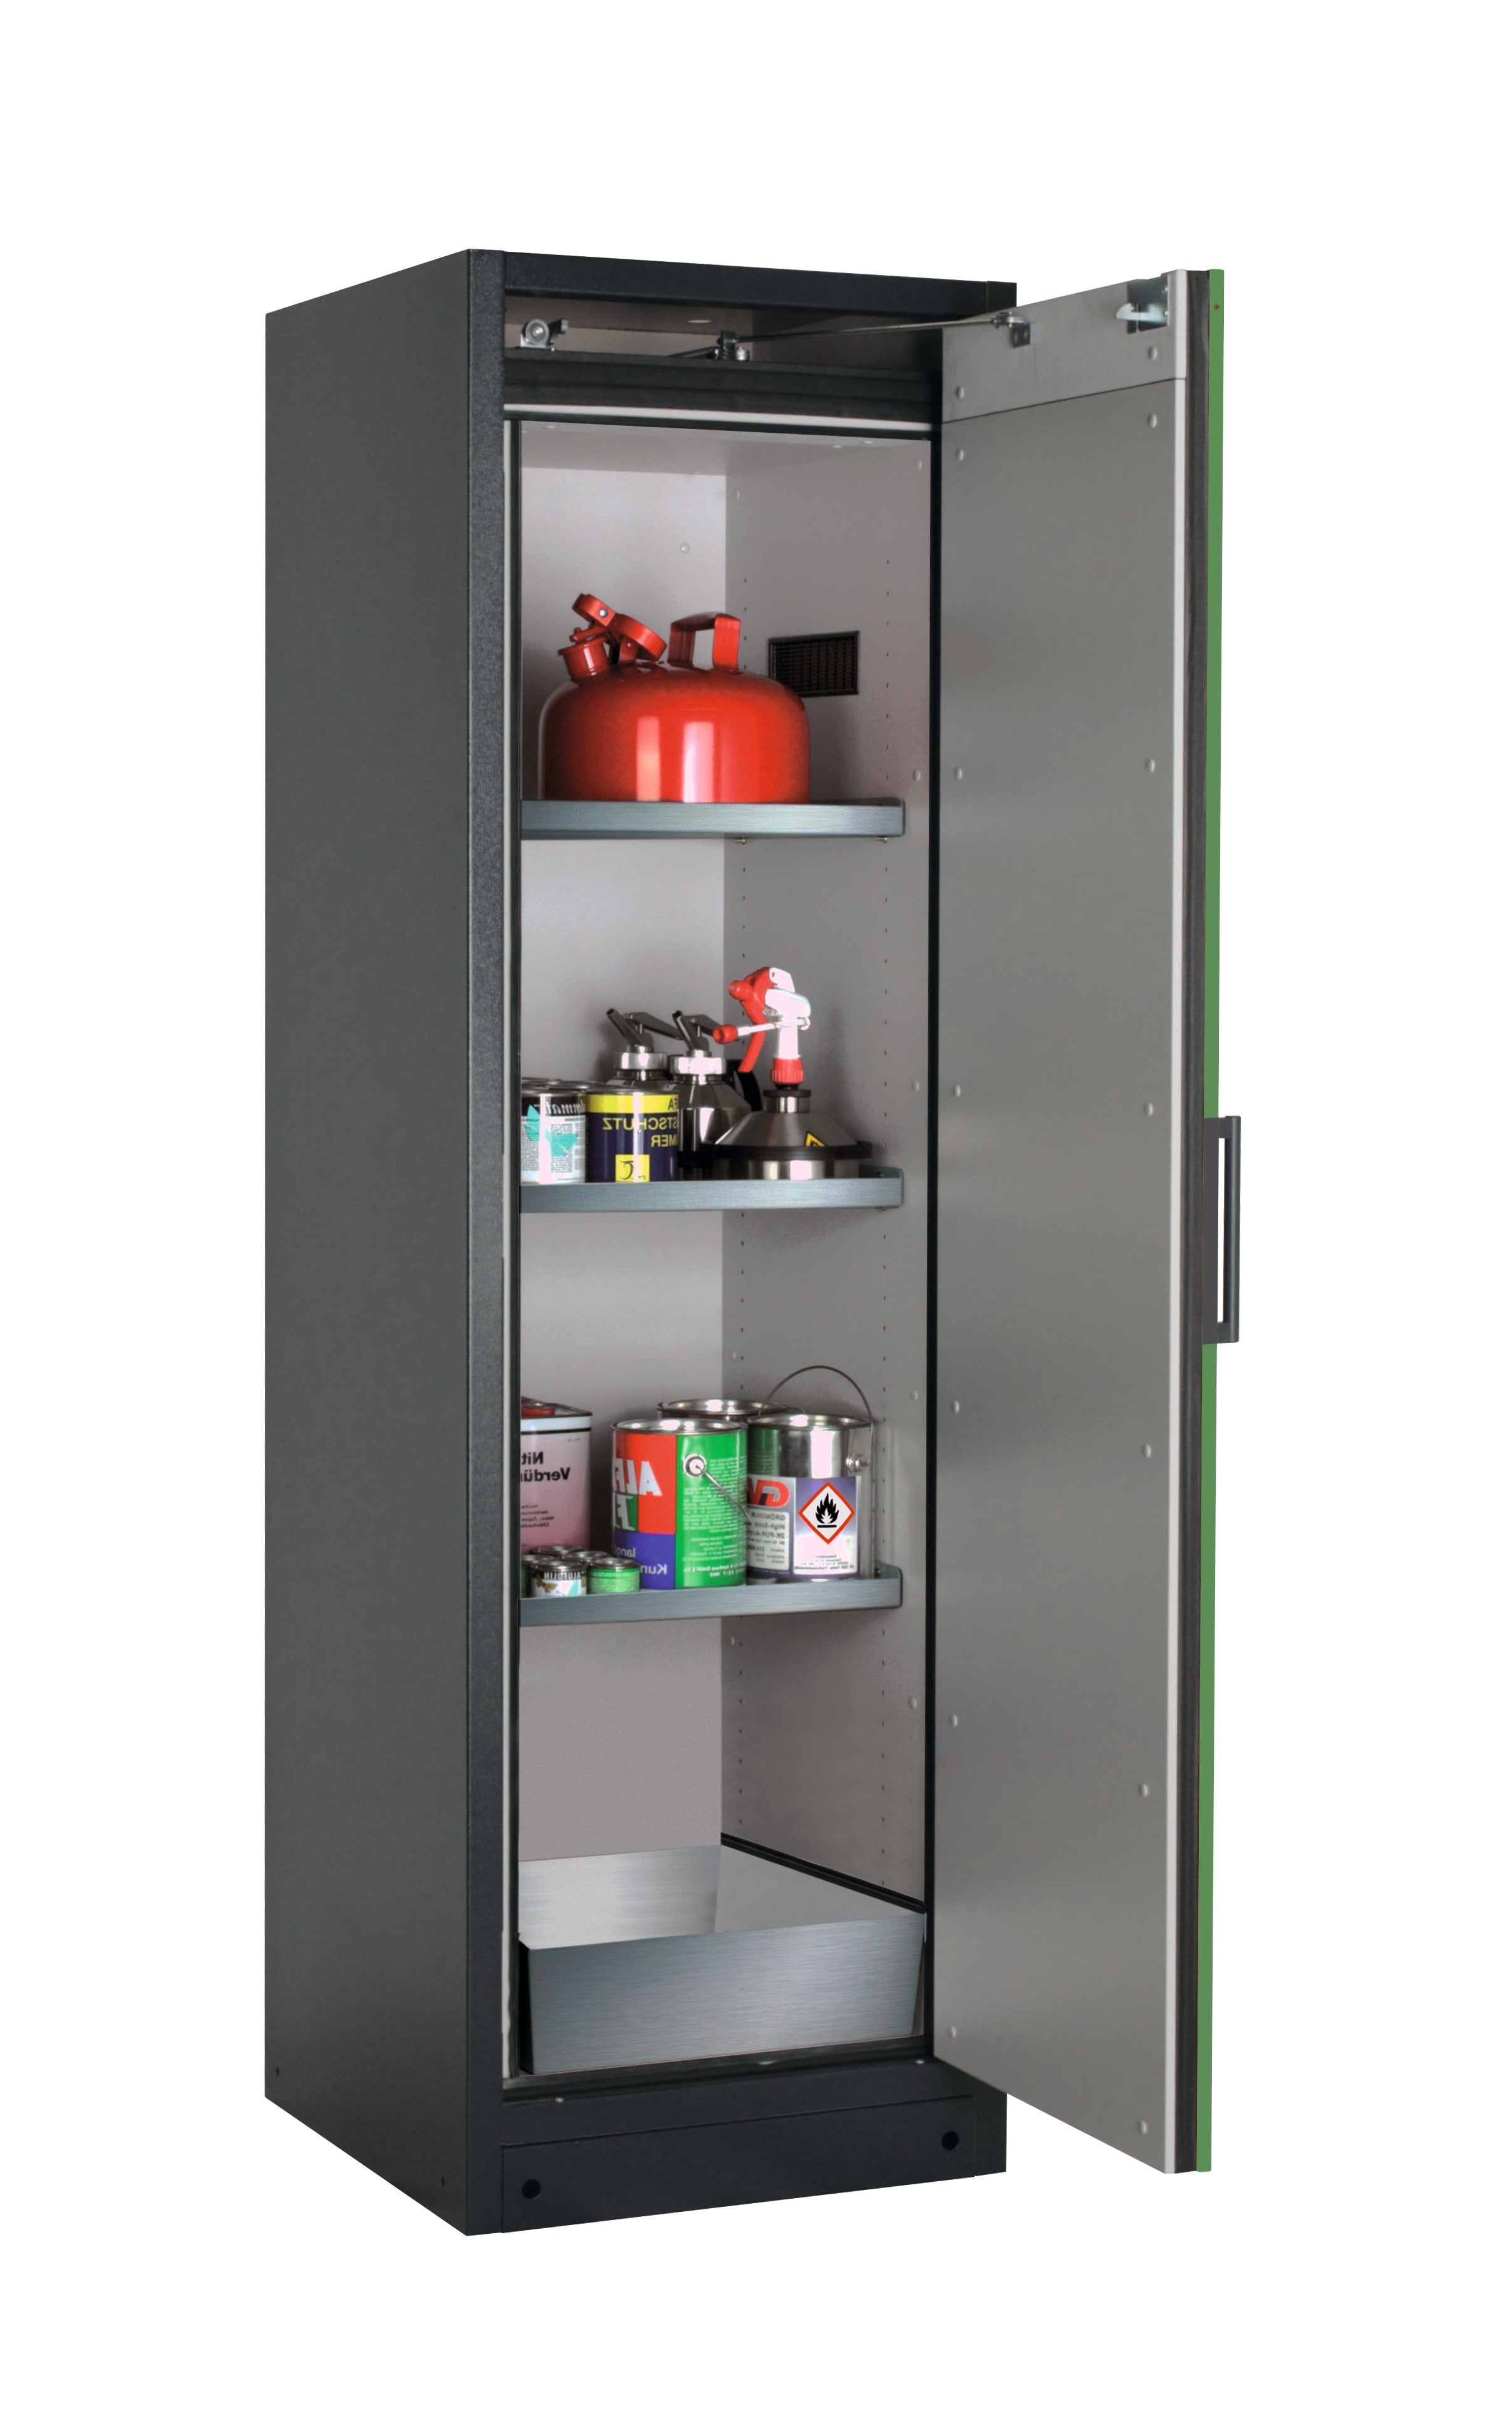 Type 90 safety storage cabinet Q-PEGASUS-90 model Q90.195.060.WDACR in reseda green RAL 6011 with 3x shelf standard (stainless steel 1.4301),